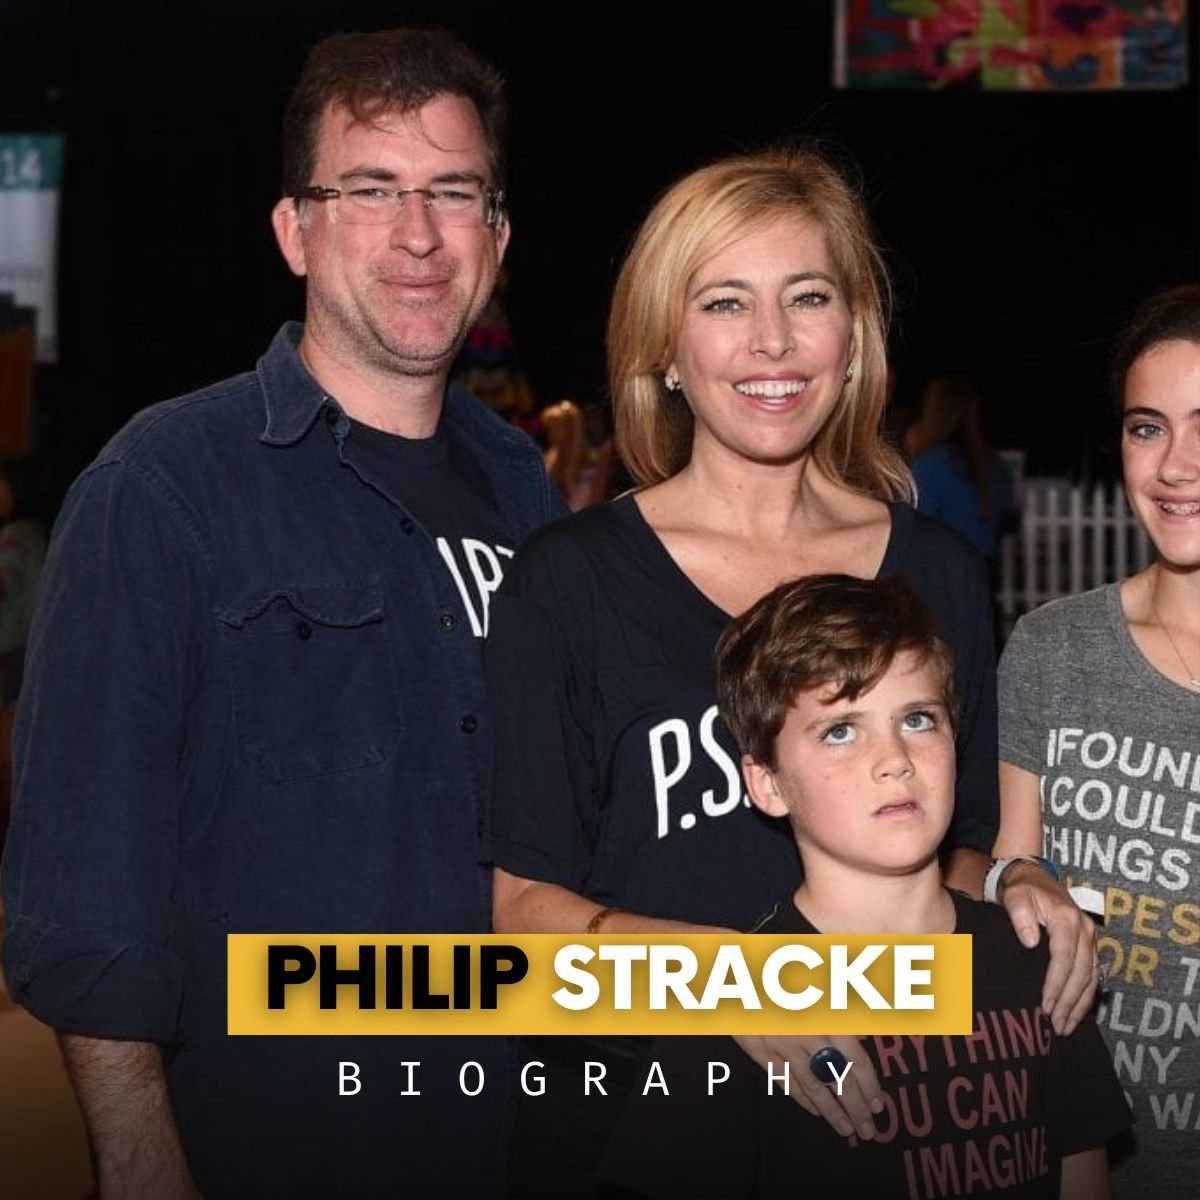 Untold Facts About Philip Stracke Age, College, Instagram, Family, And More